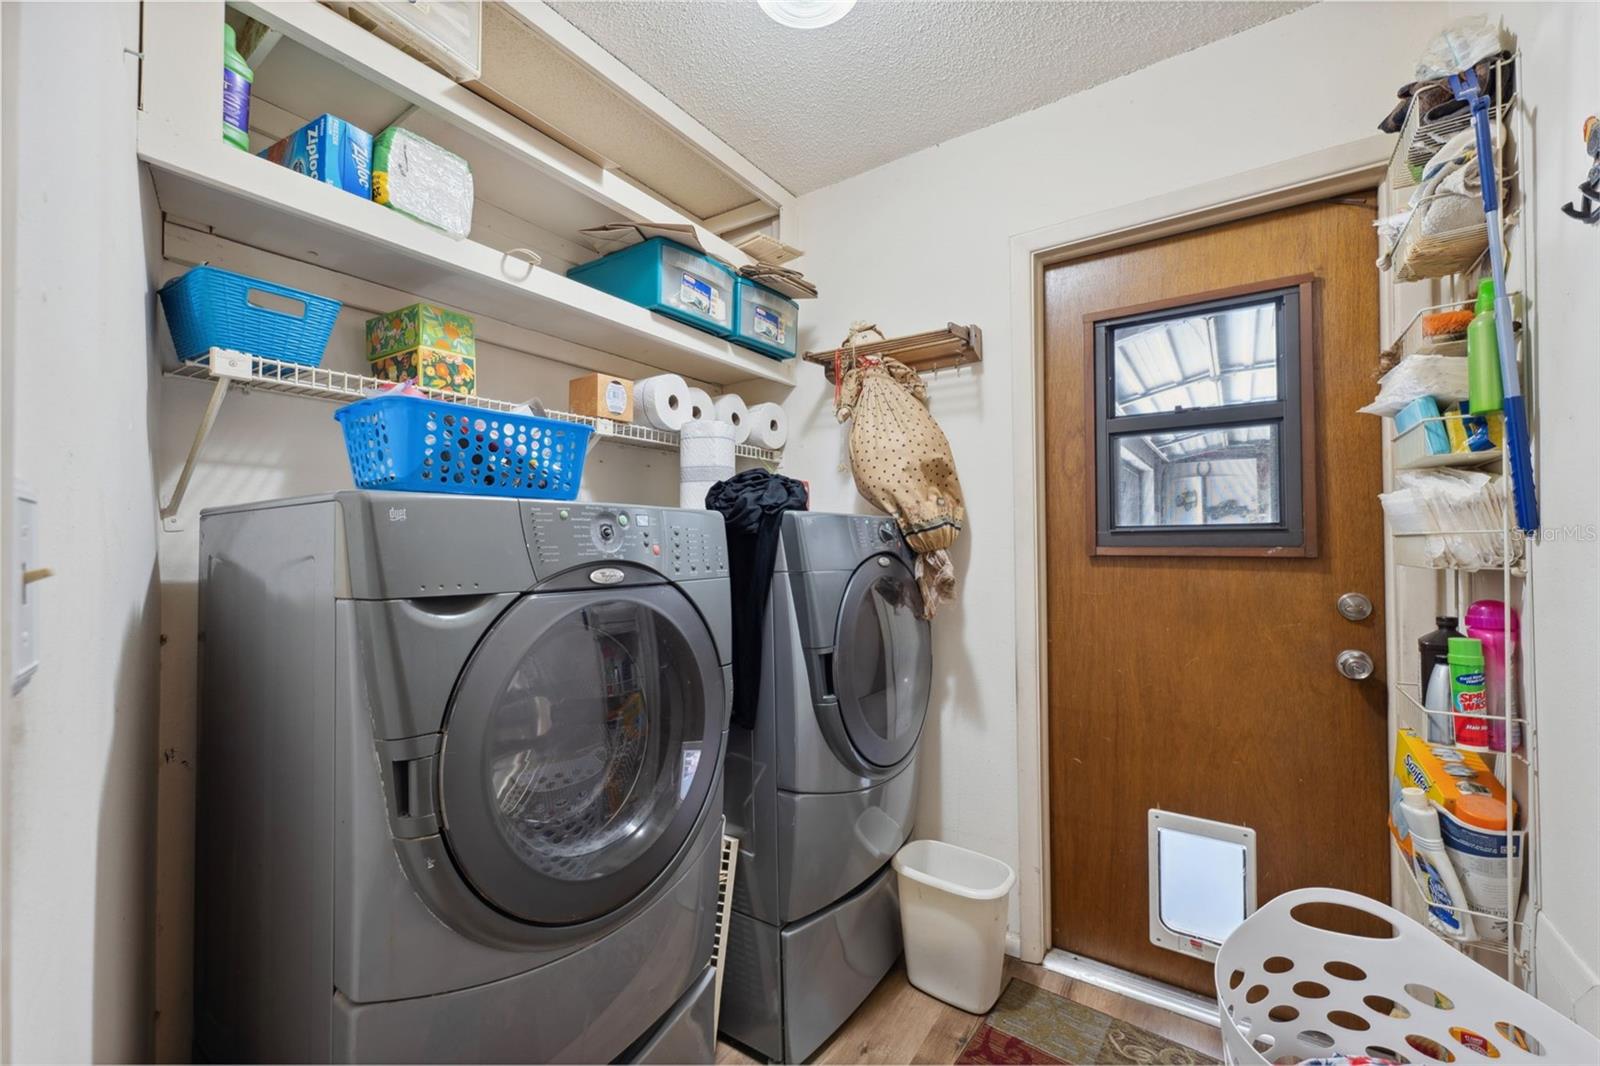 Inside laundry room with ample storage.